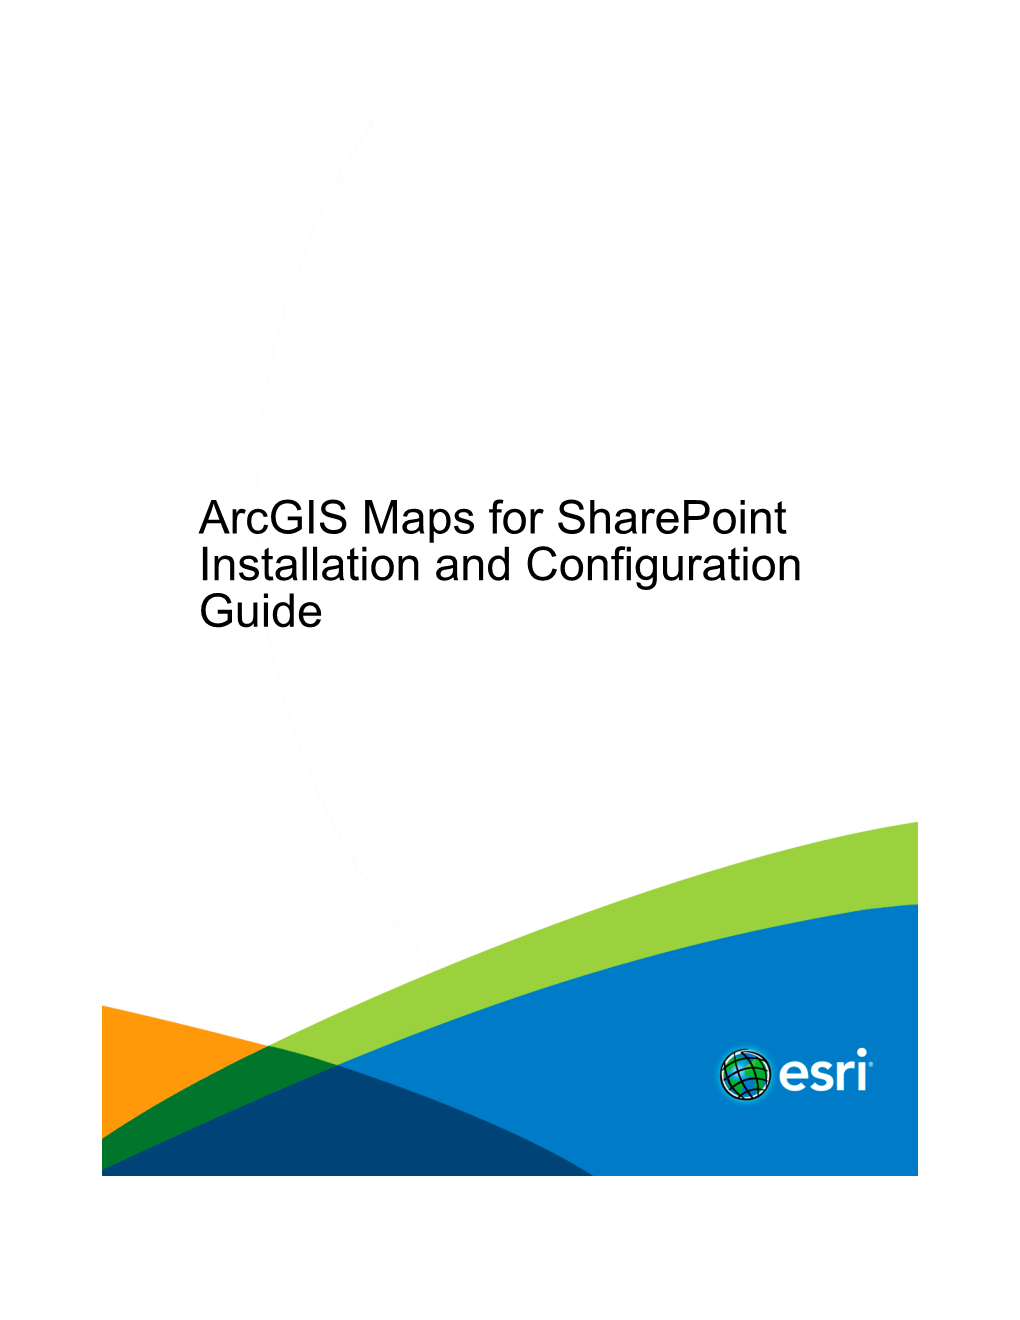 Arcgis Maps for Sharepoint Installation and Configuration Guide